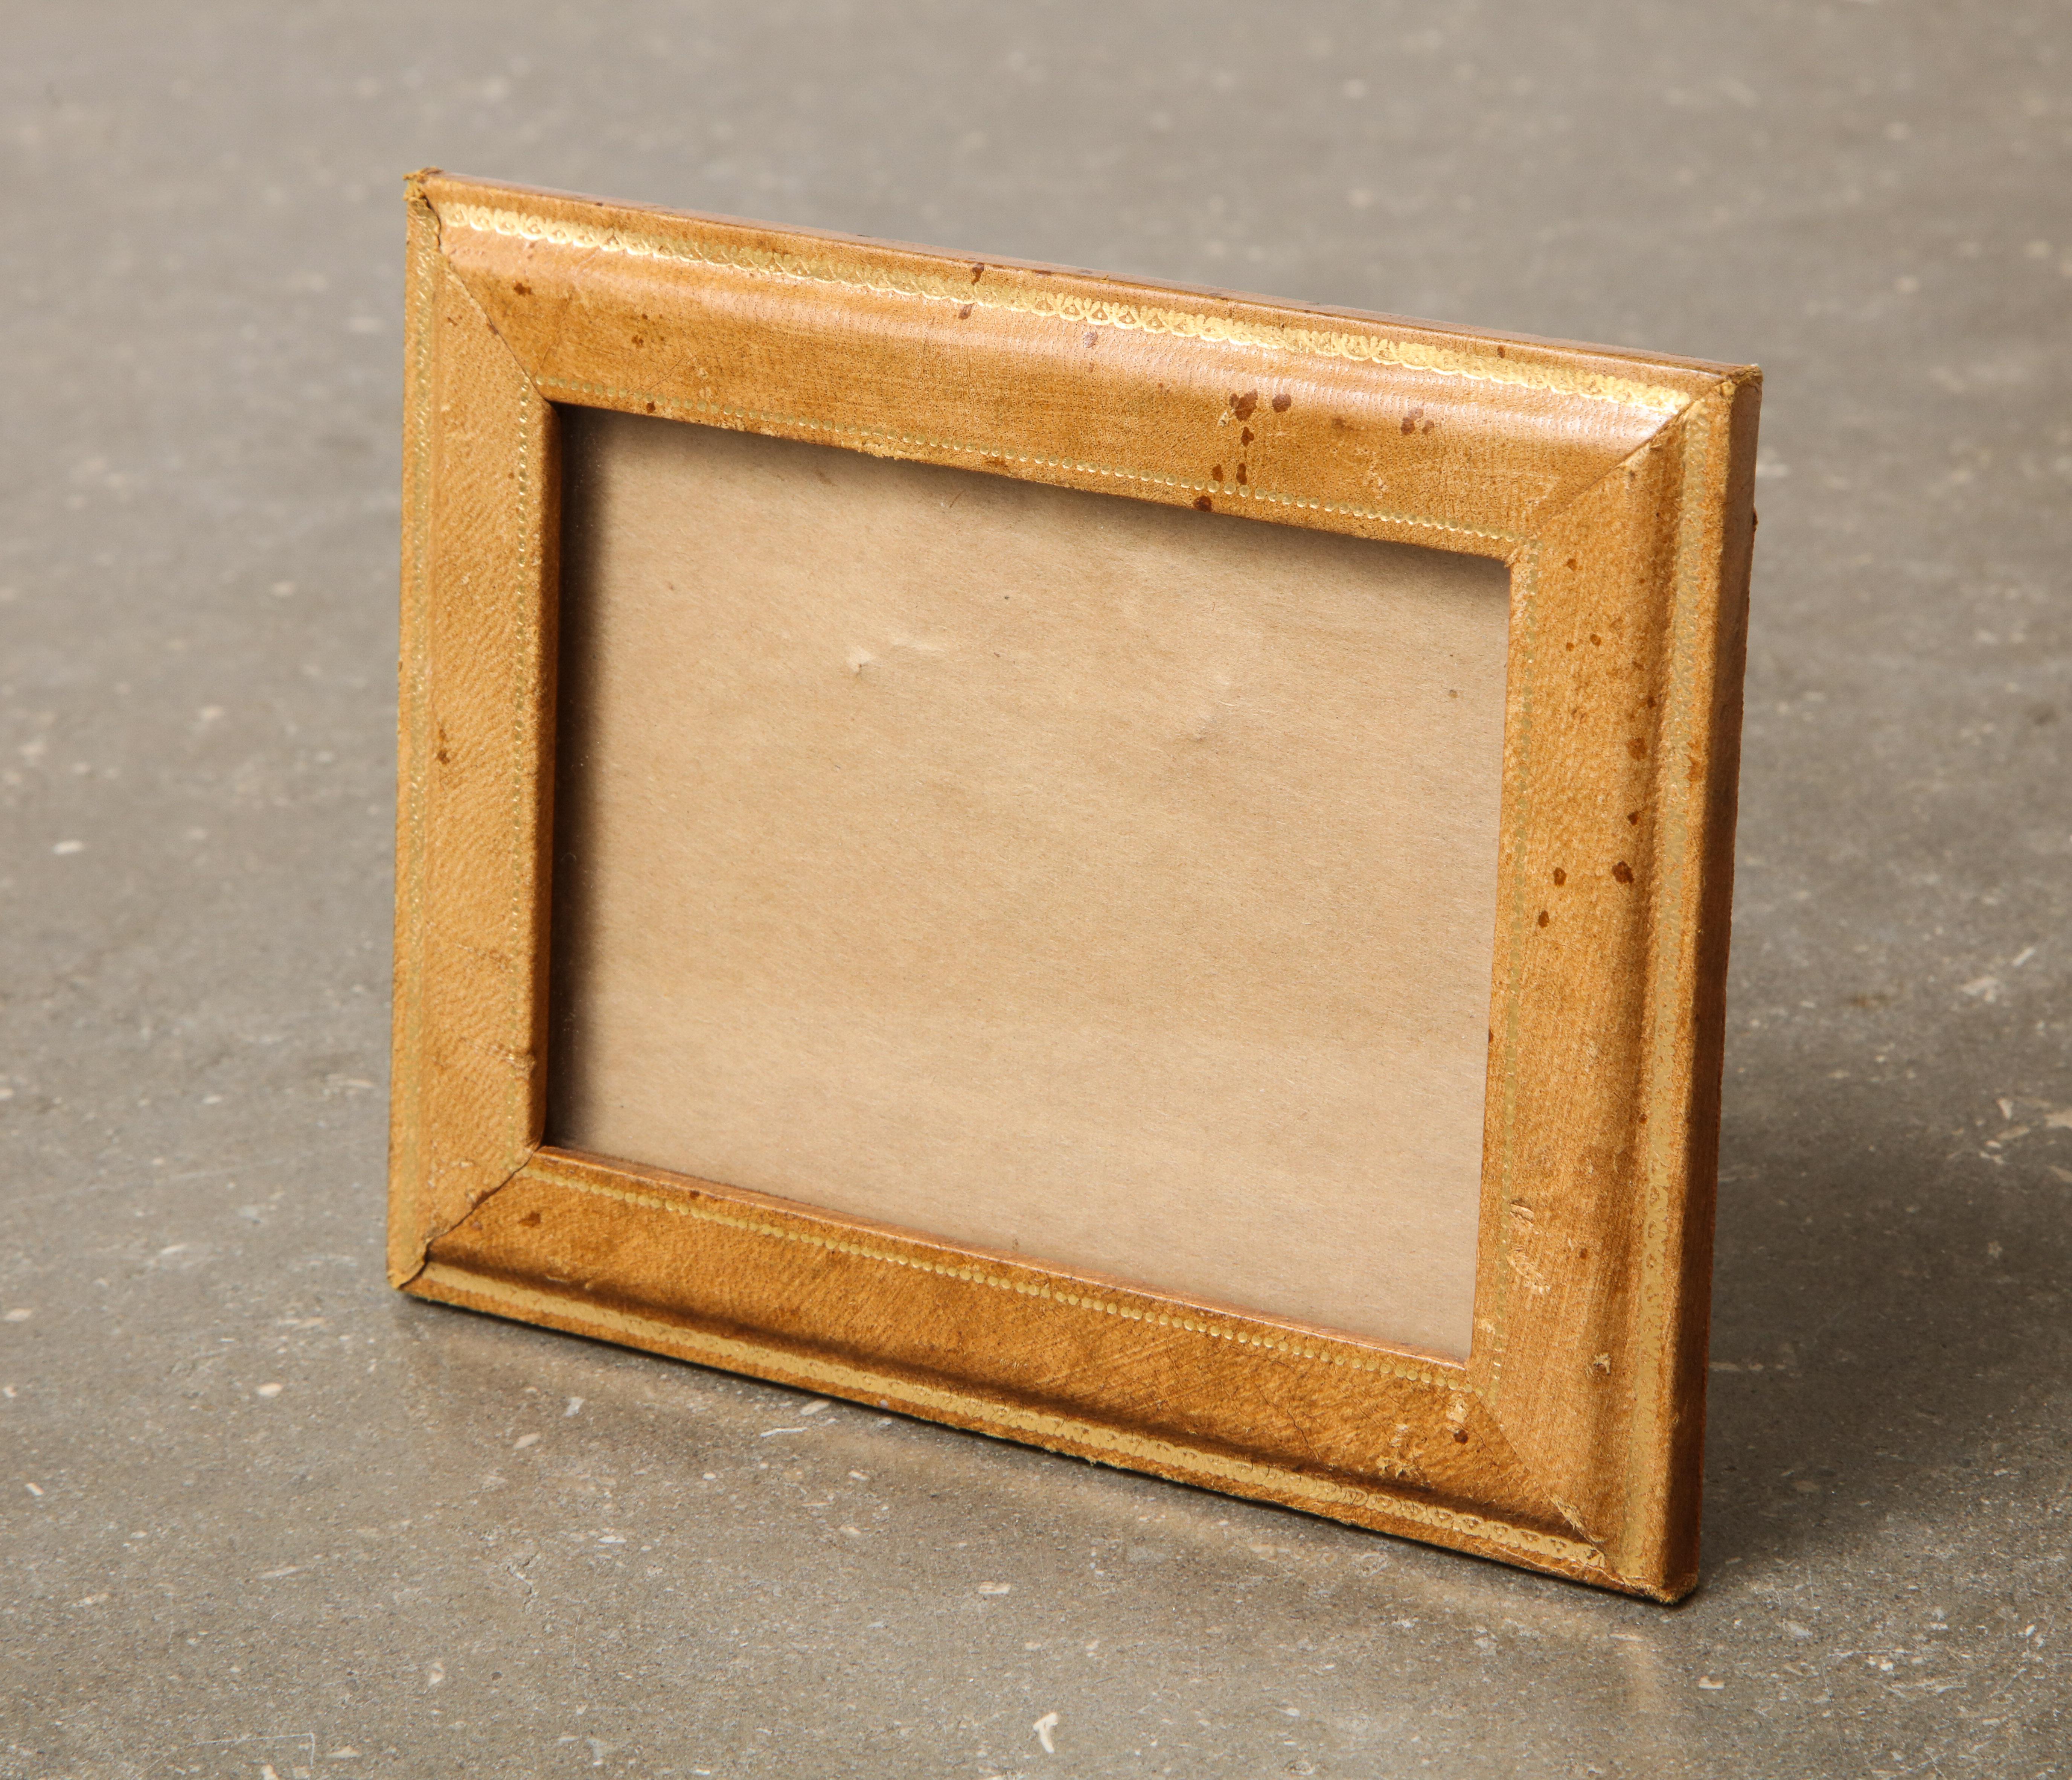 1960s Venetian hand-tooled leather picture frame. Depth with foot out = 2